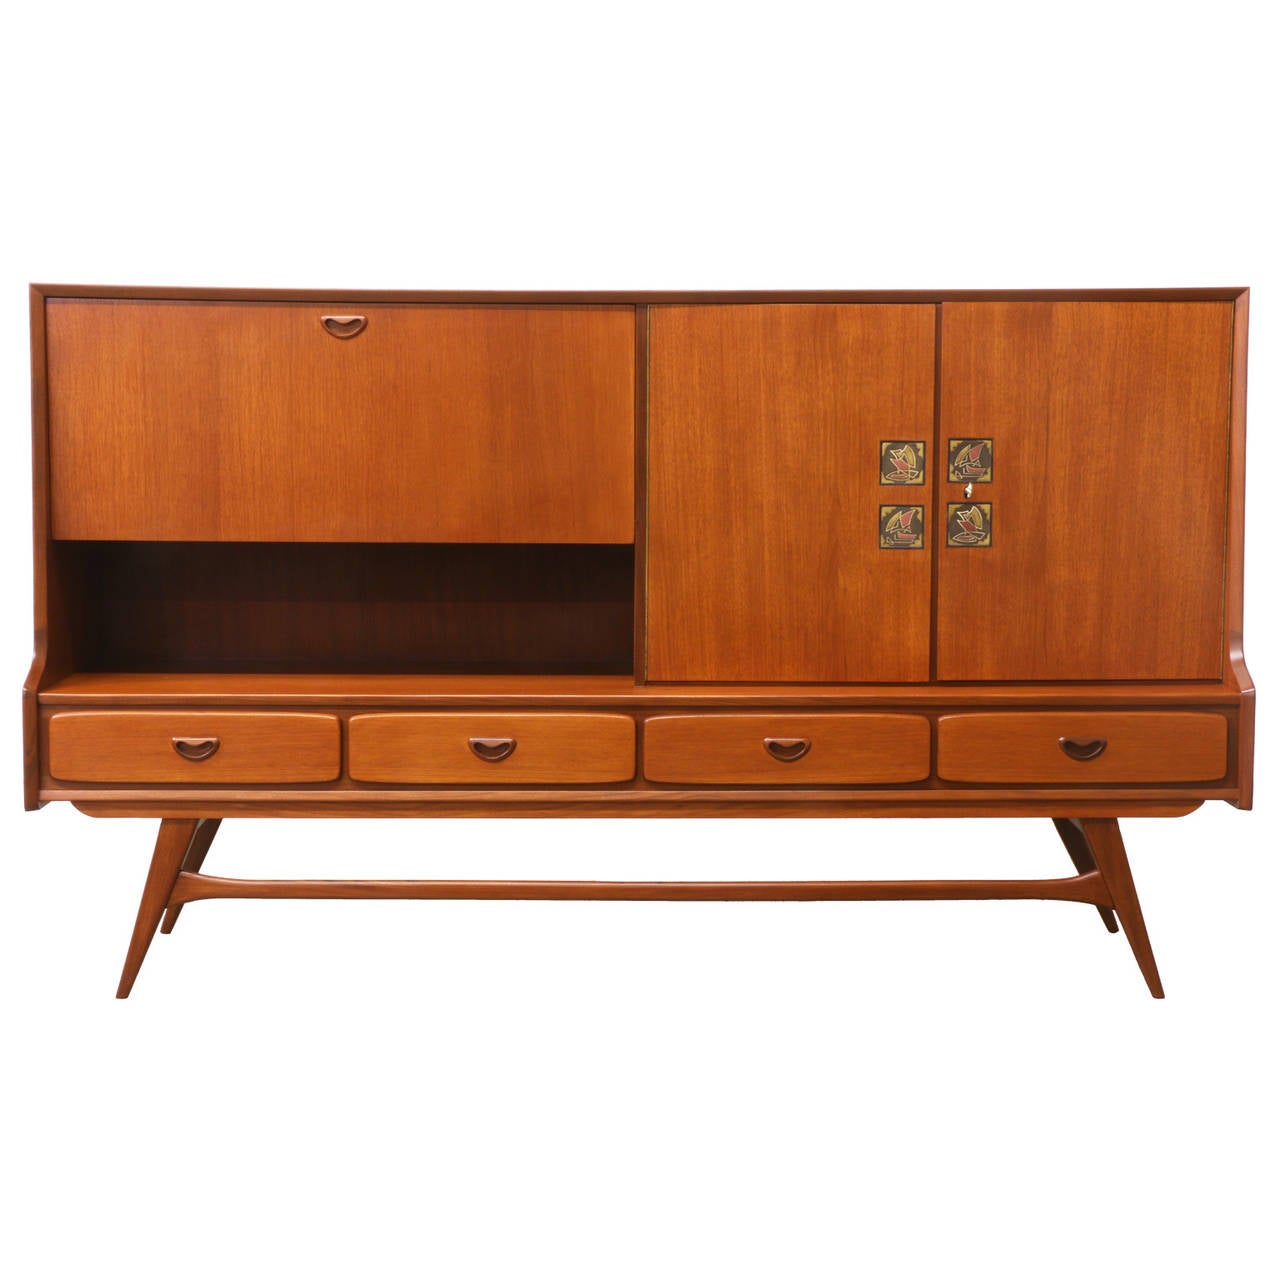 Designer: Unknown
Manufacturer: Unknown
Period/Style: Danish Modern
Country: Denmark
Date: 1960’s

Dimensions: 46″H x 78.75″L x 19.5″W
Materials: Teak
Condition: Excellent – Newly Refinished
Number of Items: 1
ID Number: